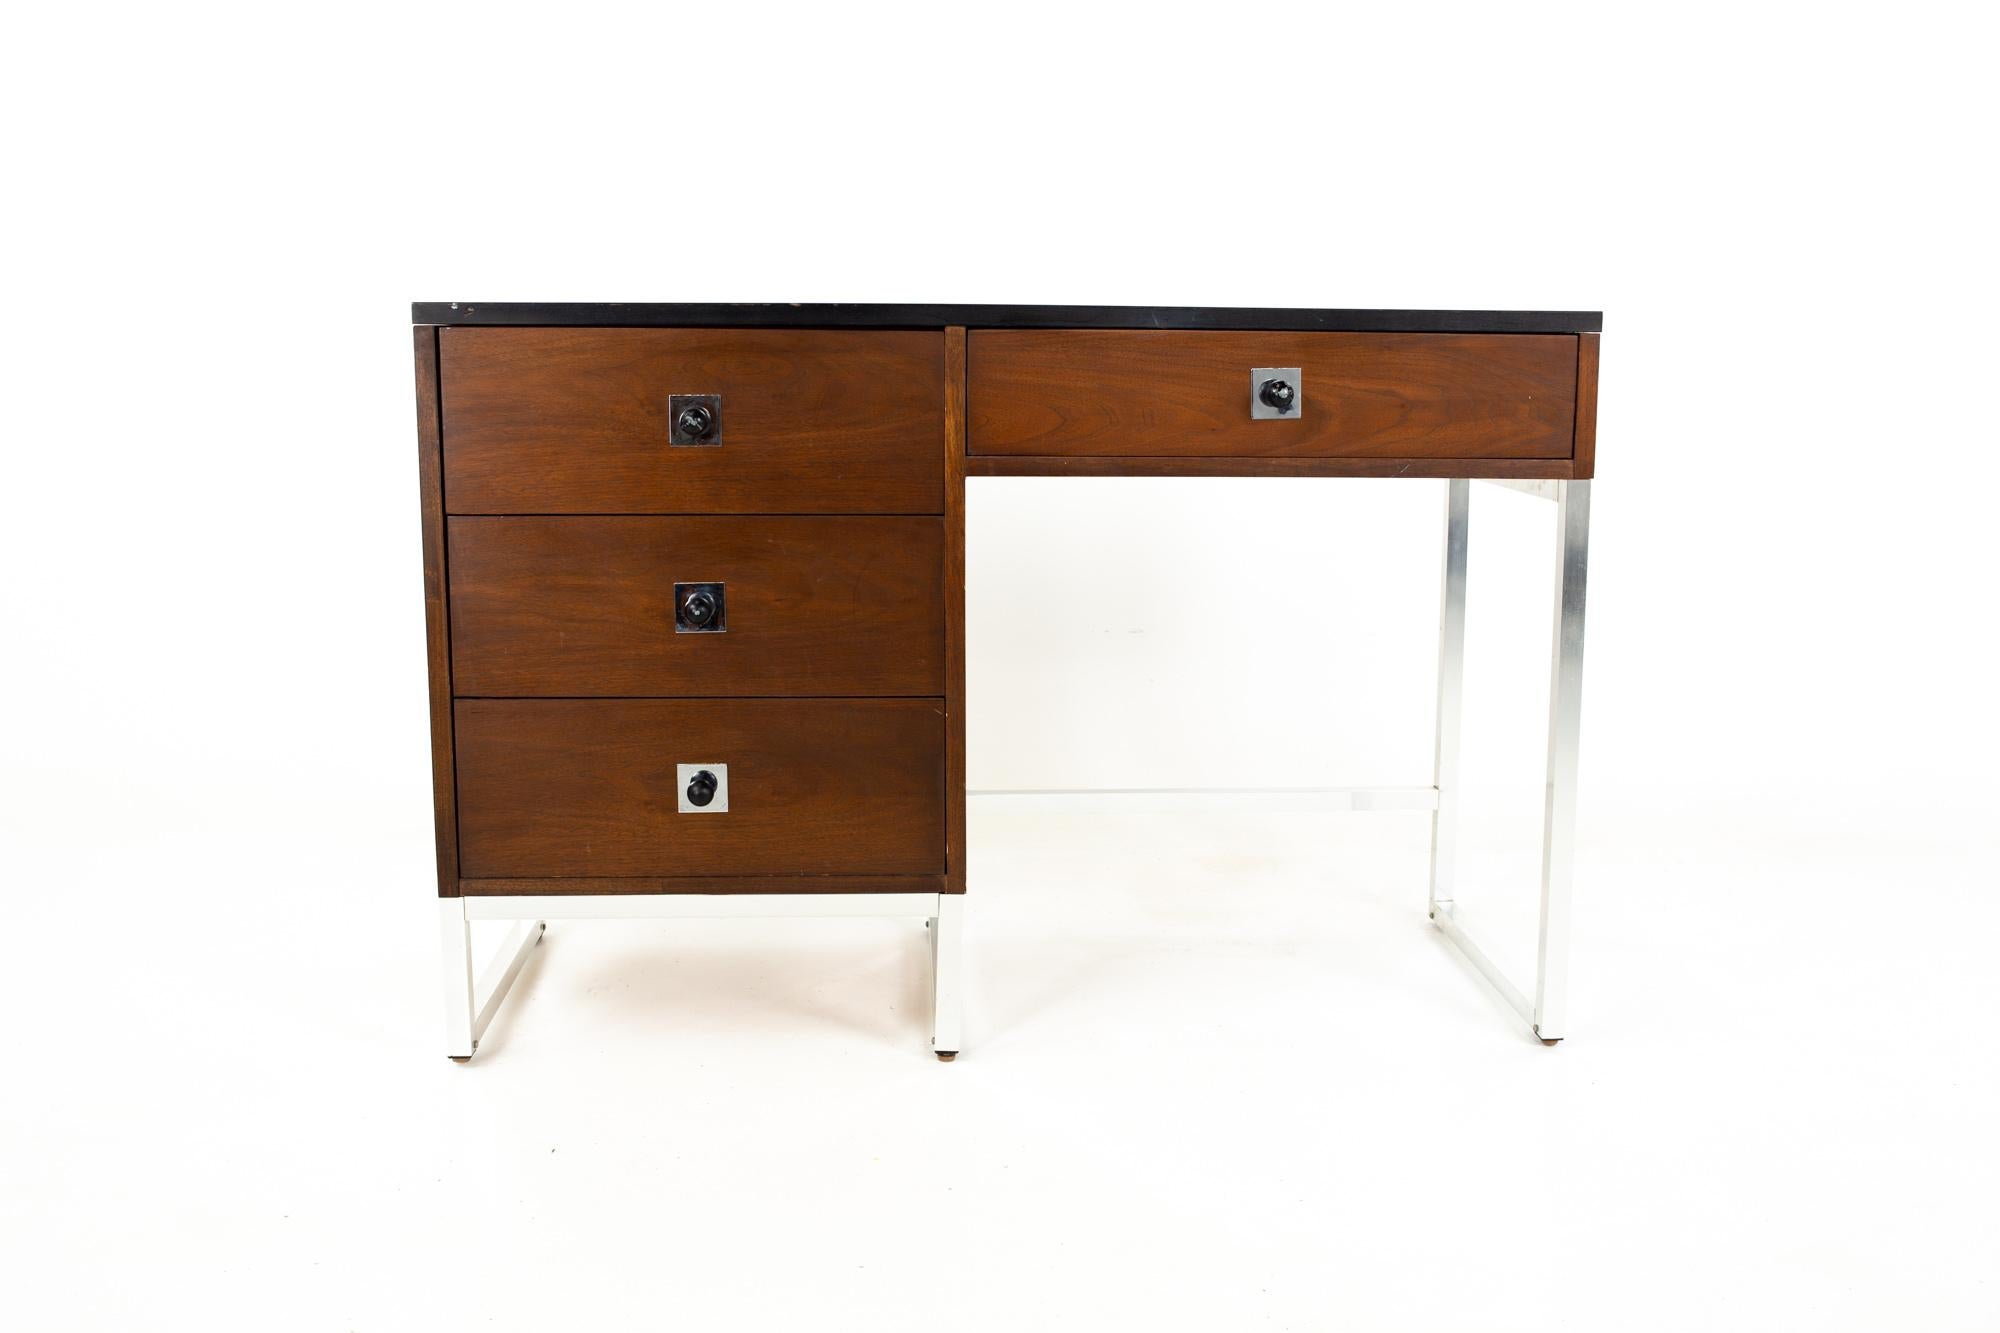 George Nelson style Thomasville Mid Century walnut chrome and black Formica desk
Desk measures: 46.25 wide x 18 deep x 30.25 inches high

This price includes getting this piece in what we call restored vintage condition. That means the piece is